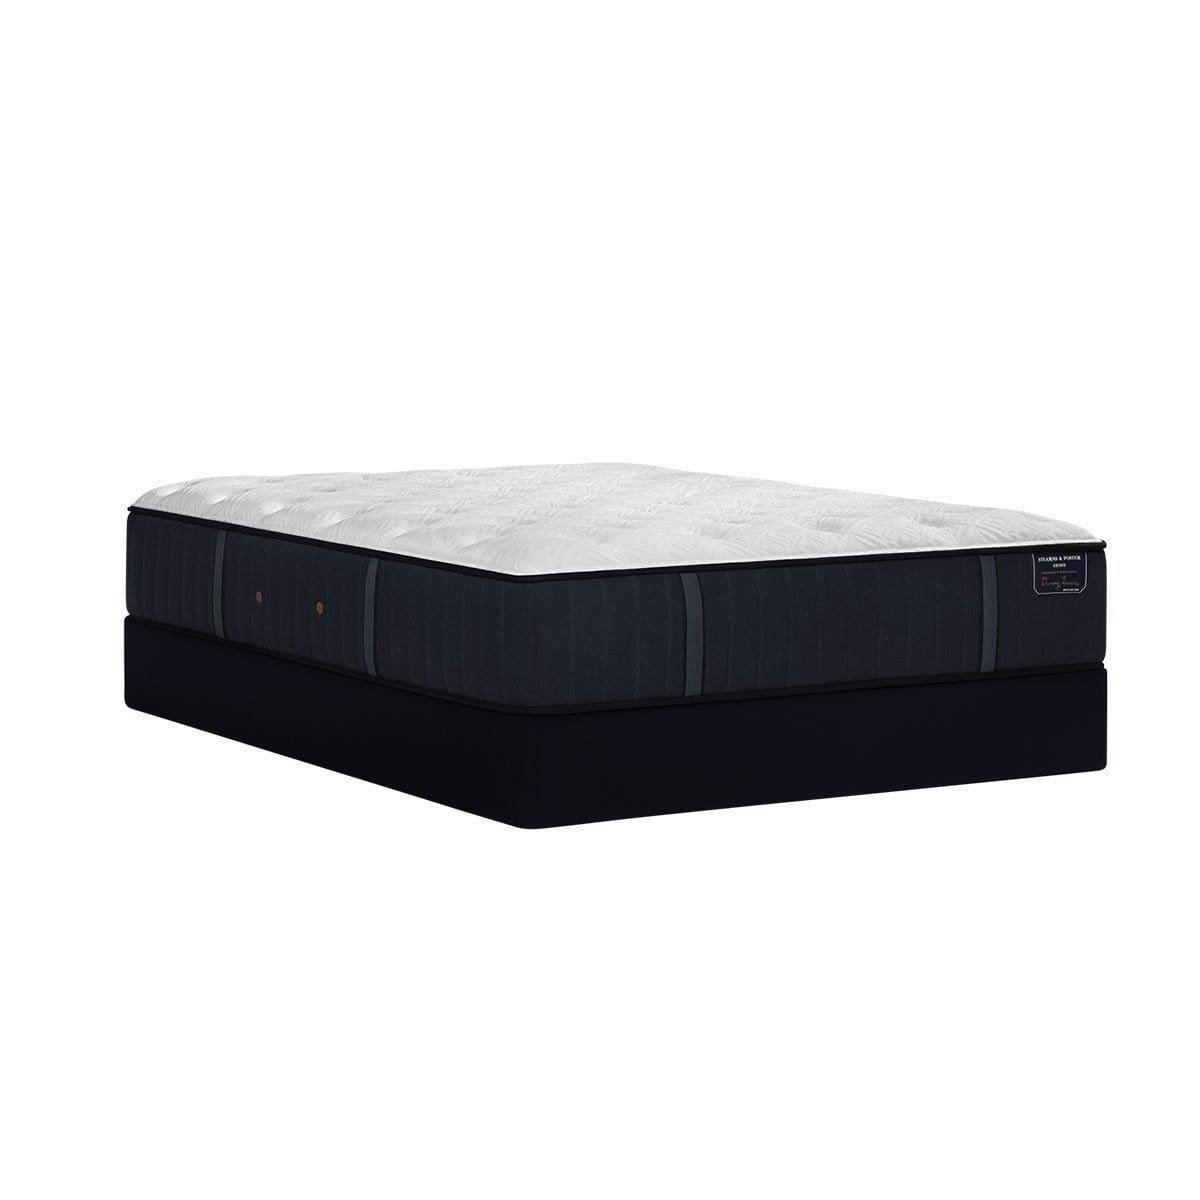 Picture of Stearns & Foster Hurston Luxury Cushion Firm Mattress